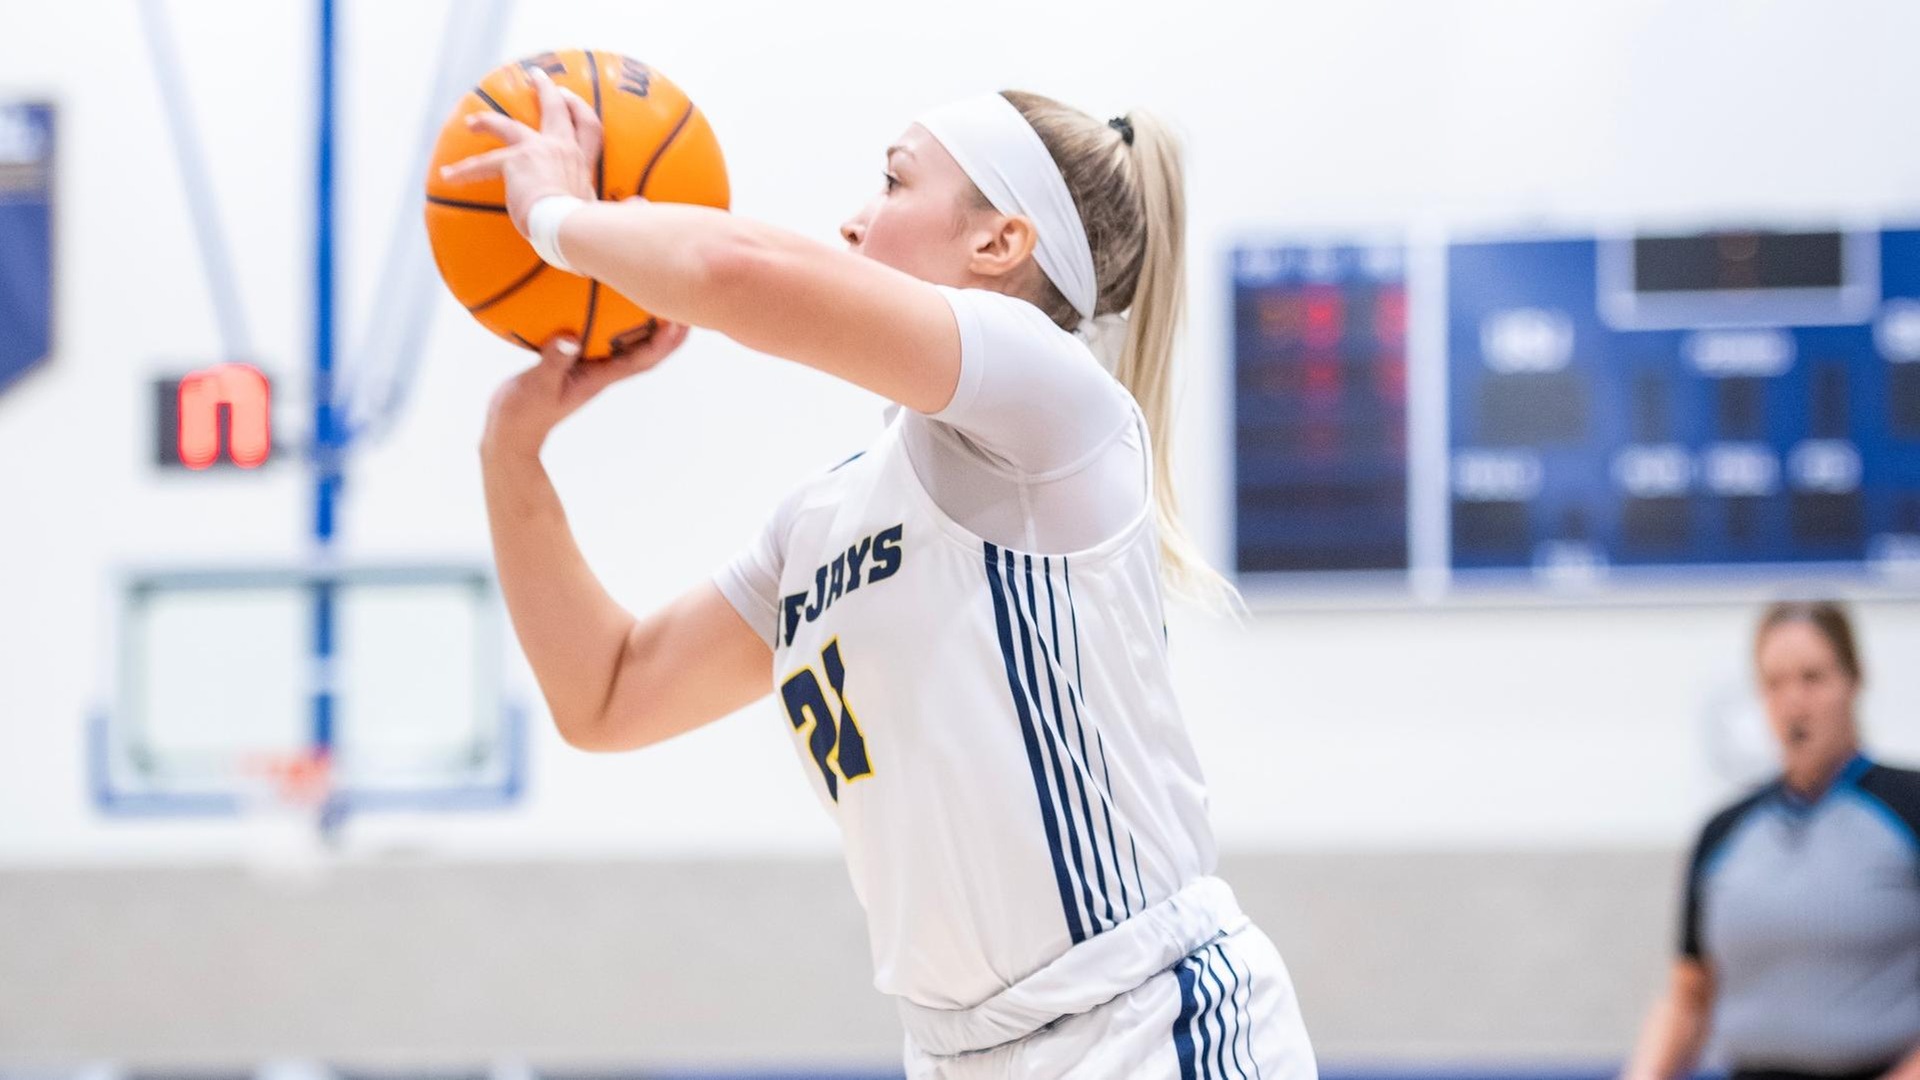 Women's Basketball Erupts Offensively, Defeats NEC in GNAC Play Saturday, 89-63